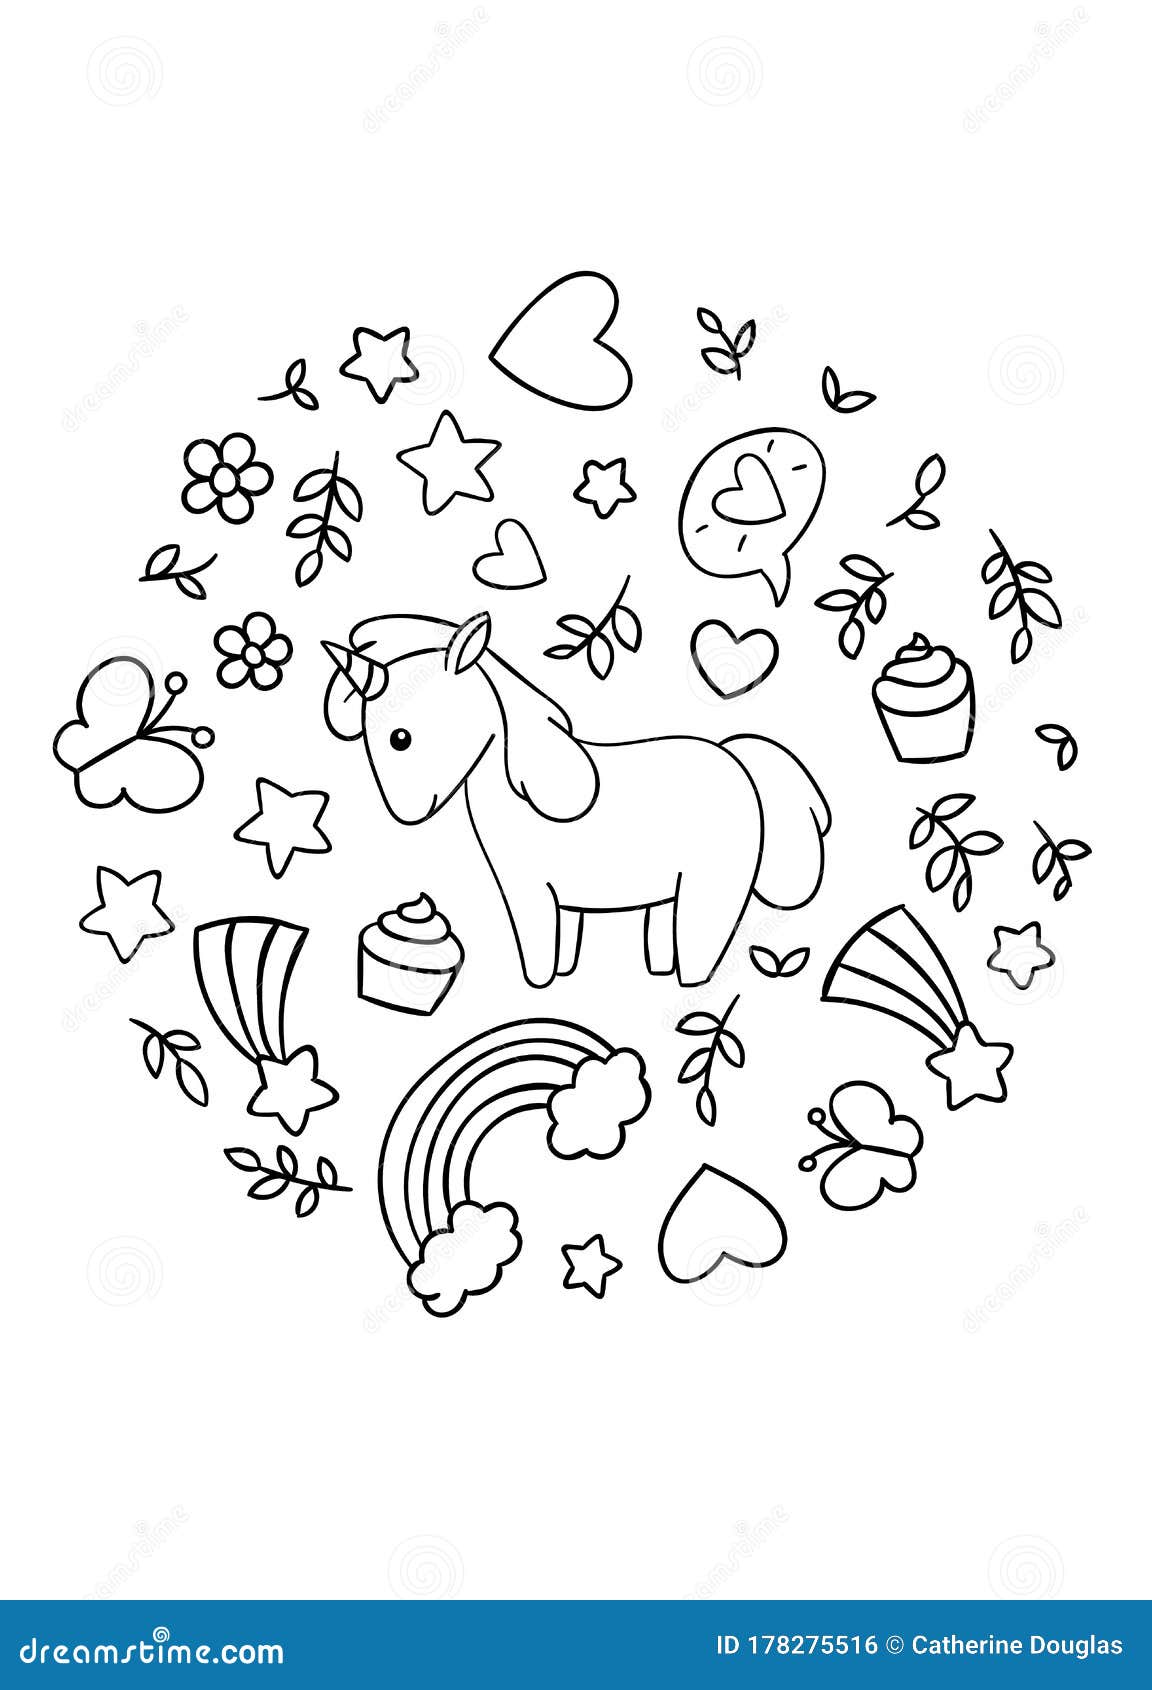 Coloring Pages, Black and White Cute Kawaii Hand Drawn Unicorn ...